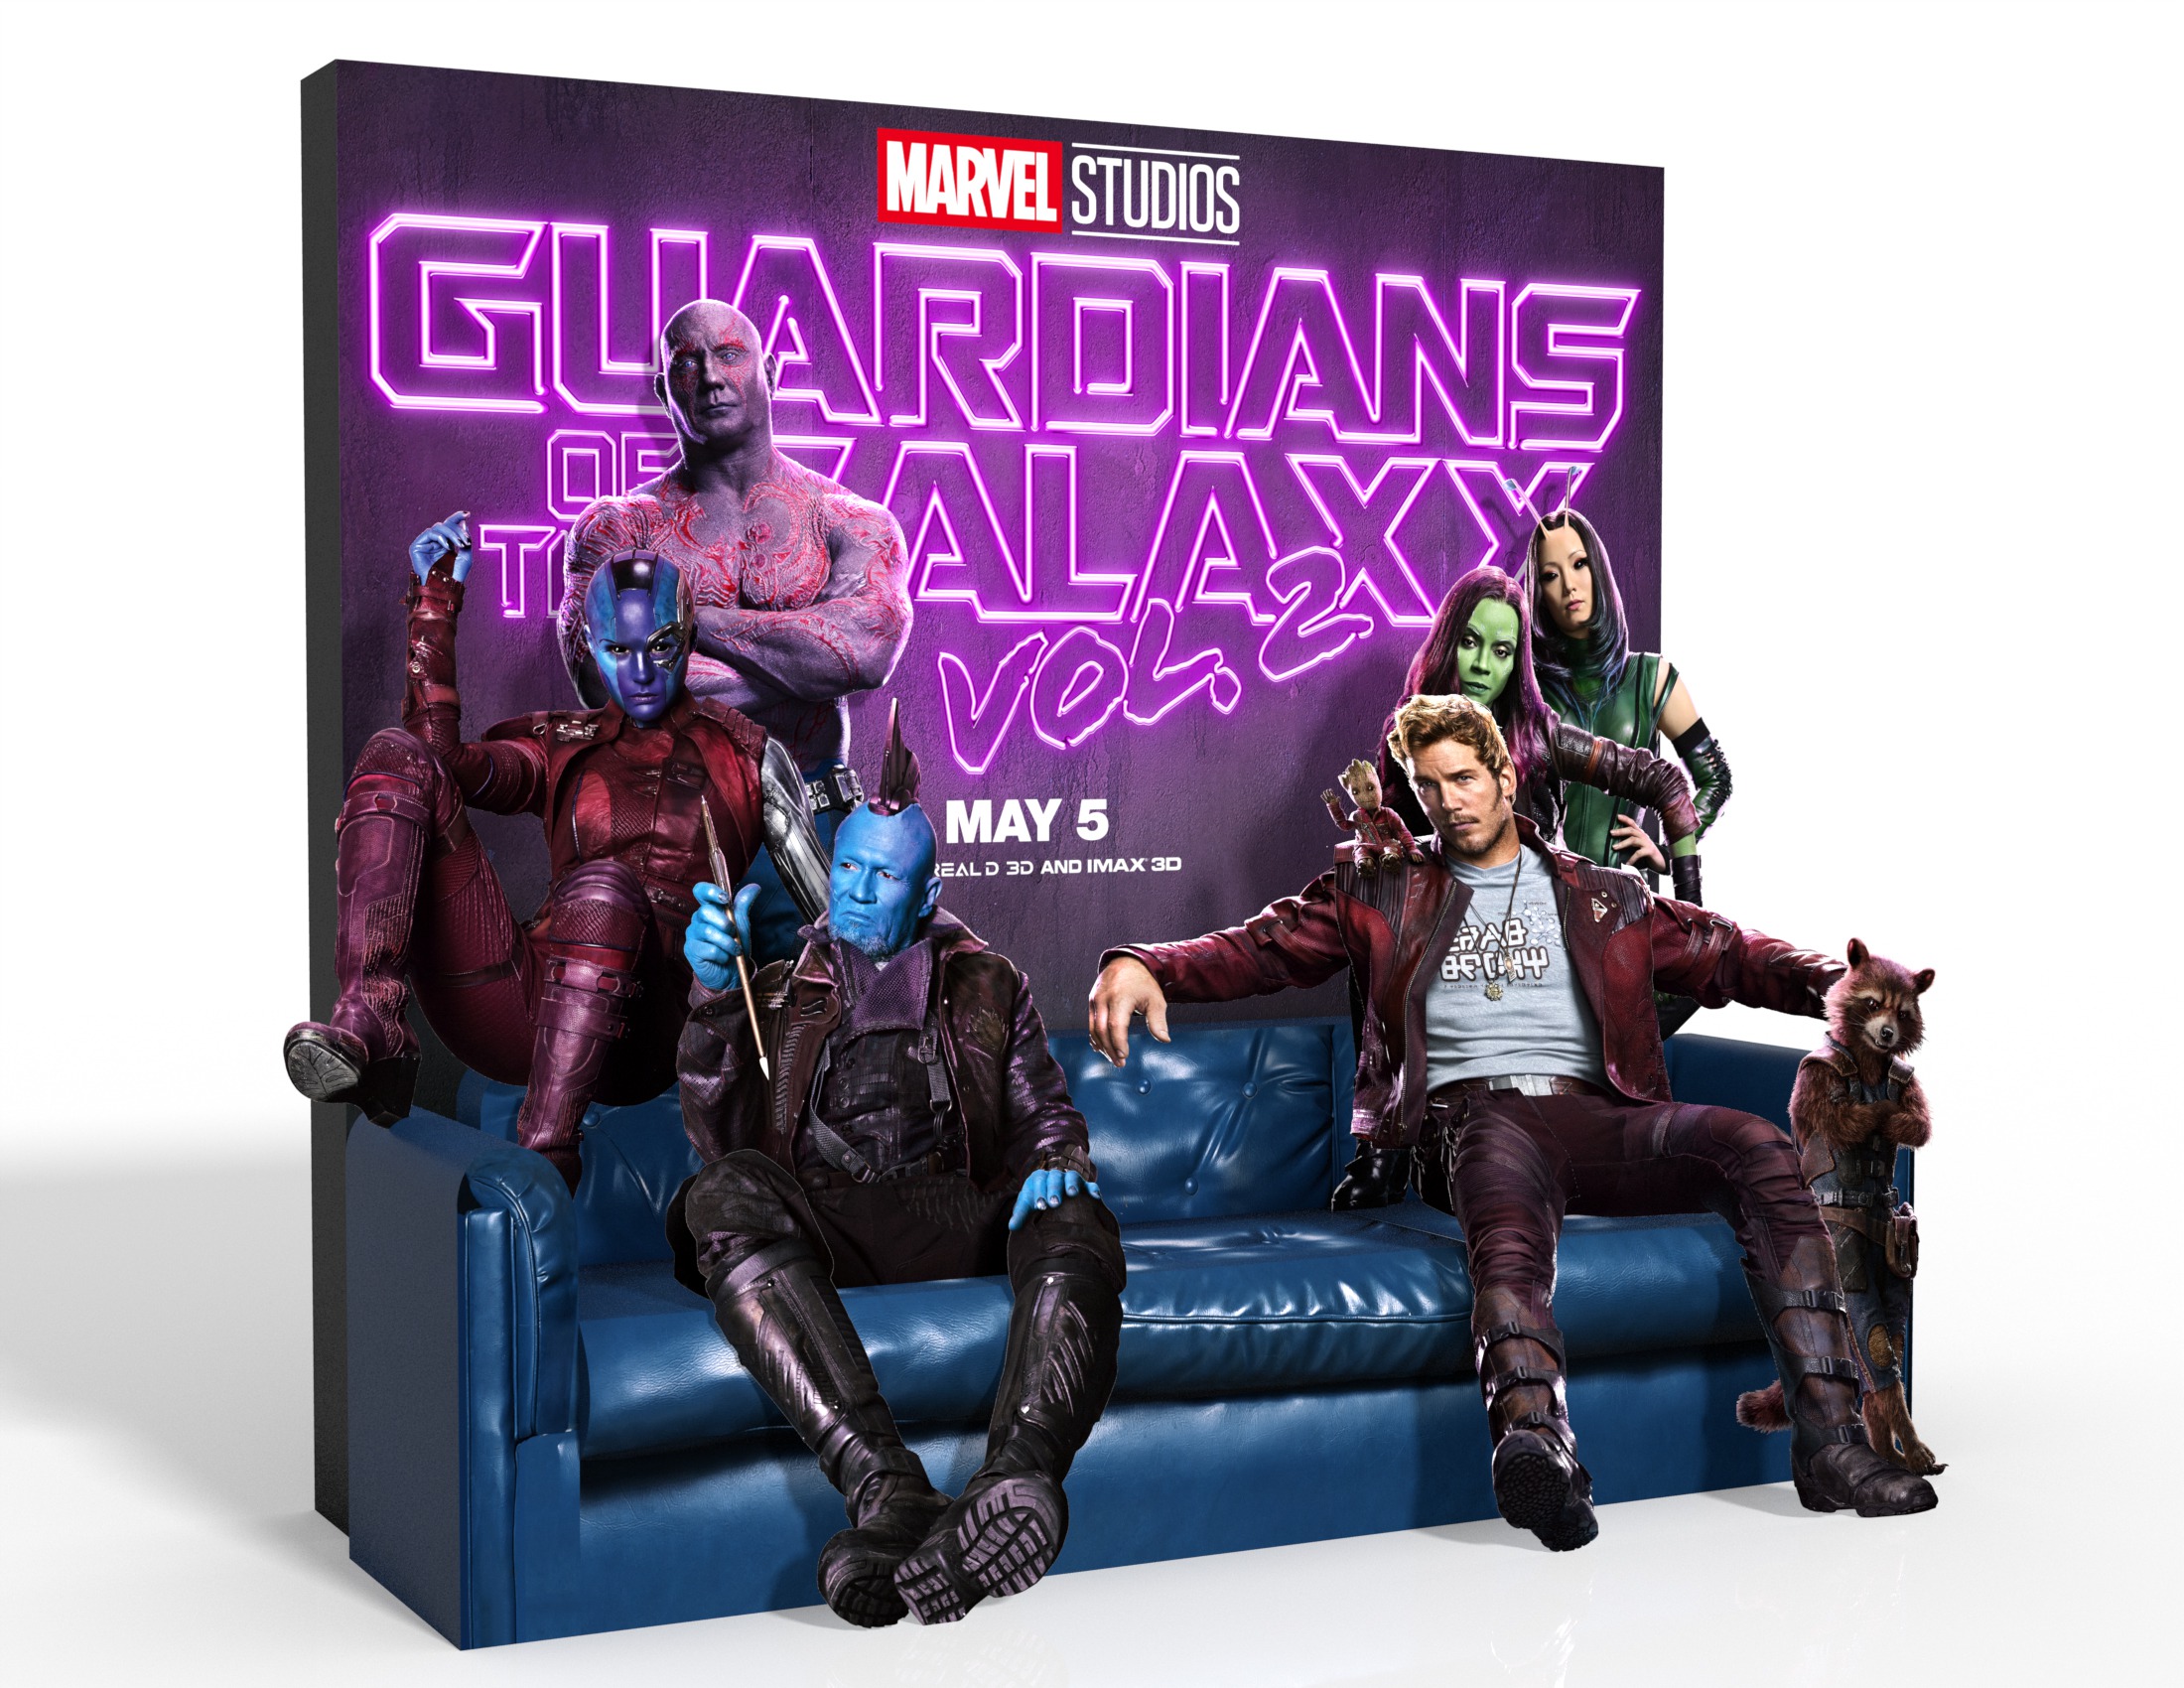 Mega Sized Movie Poster Image for Guardians of the Galaxy Vol. 2 (#45 of 45)